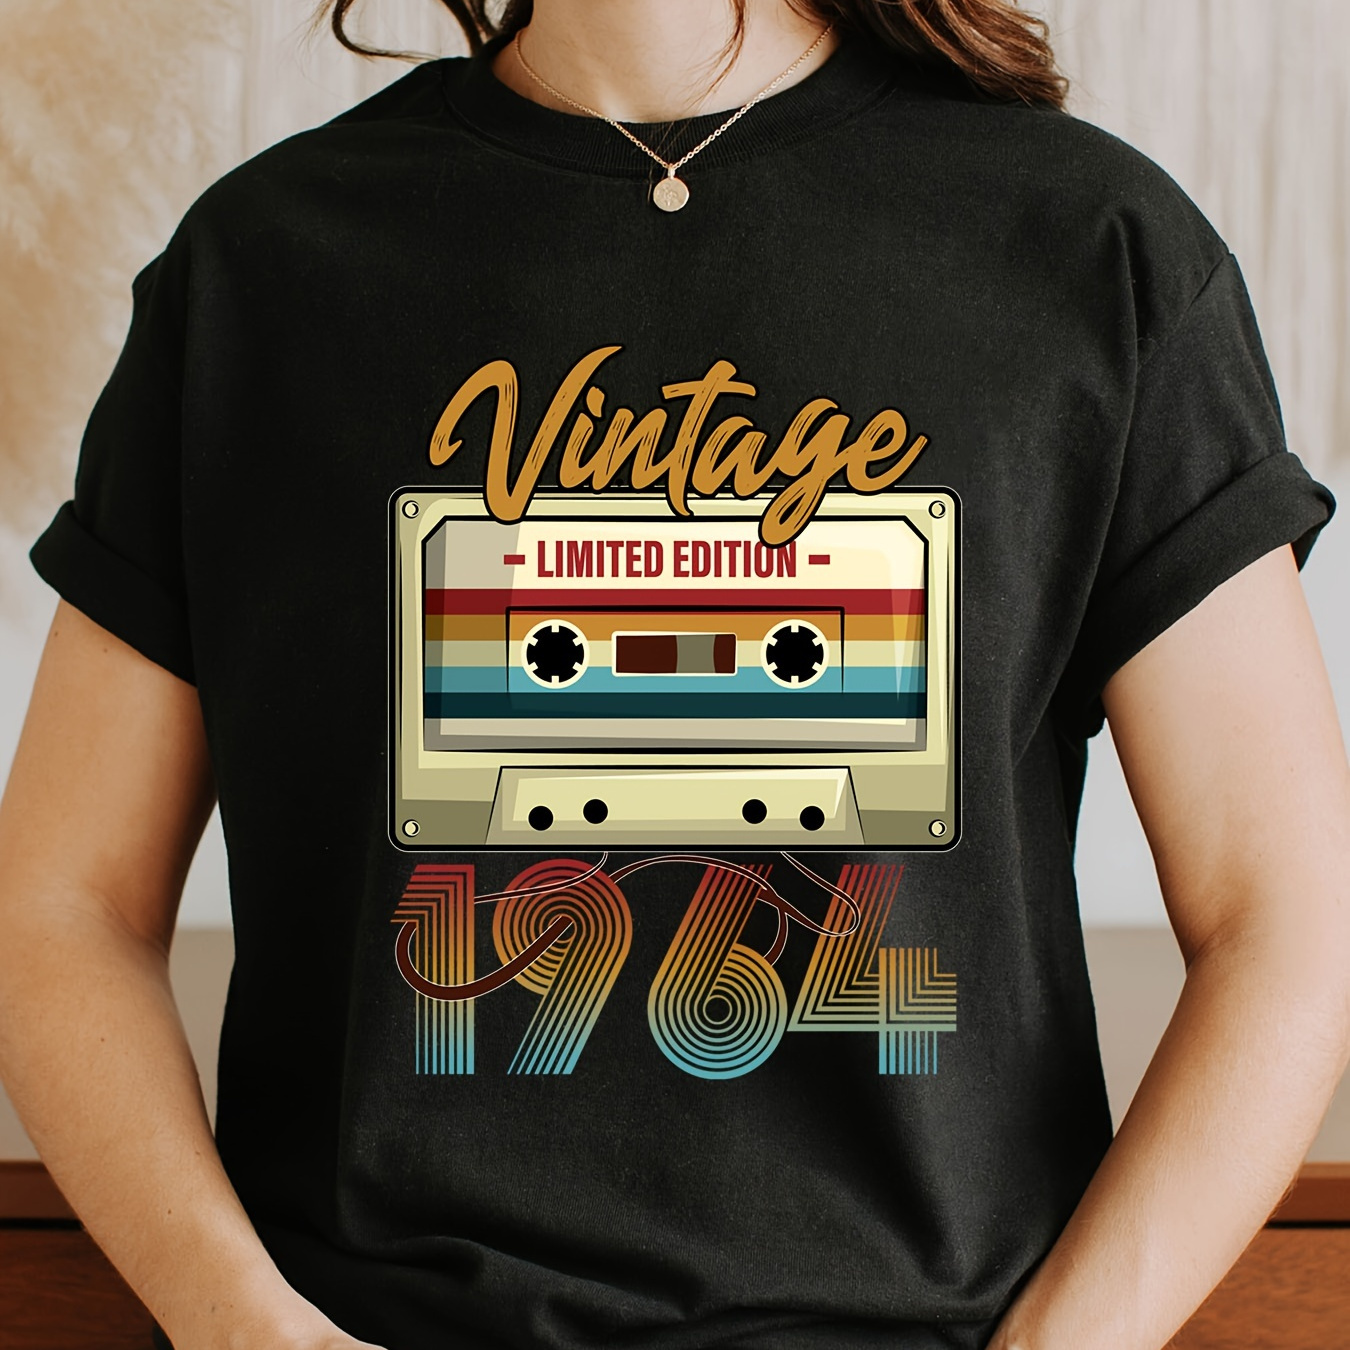 

Vintage 1964 Print Crew Neck T-shirt, Short Sleeve Casual Top For Summer & Spring, Women's Clothing